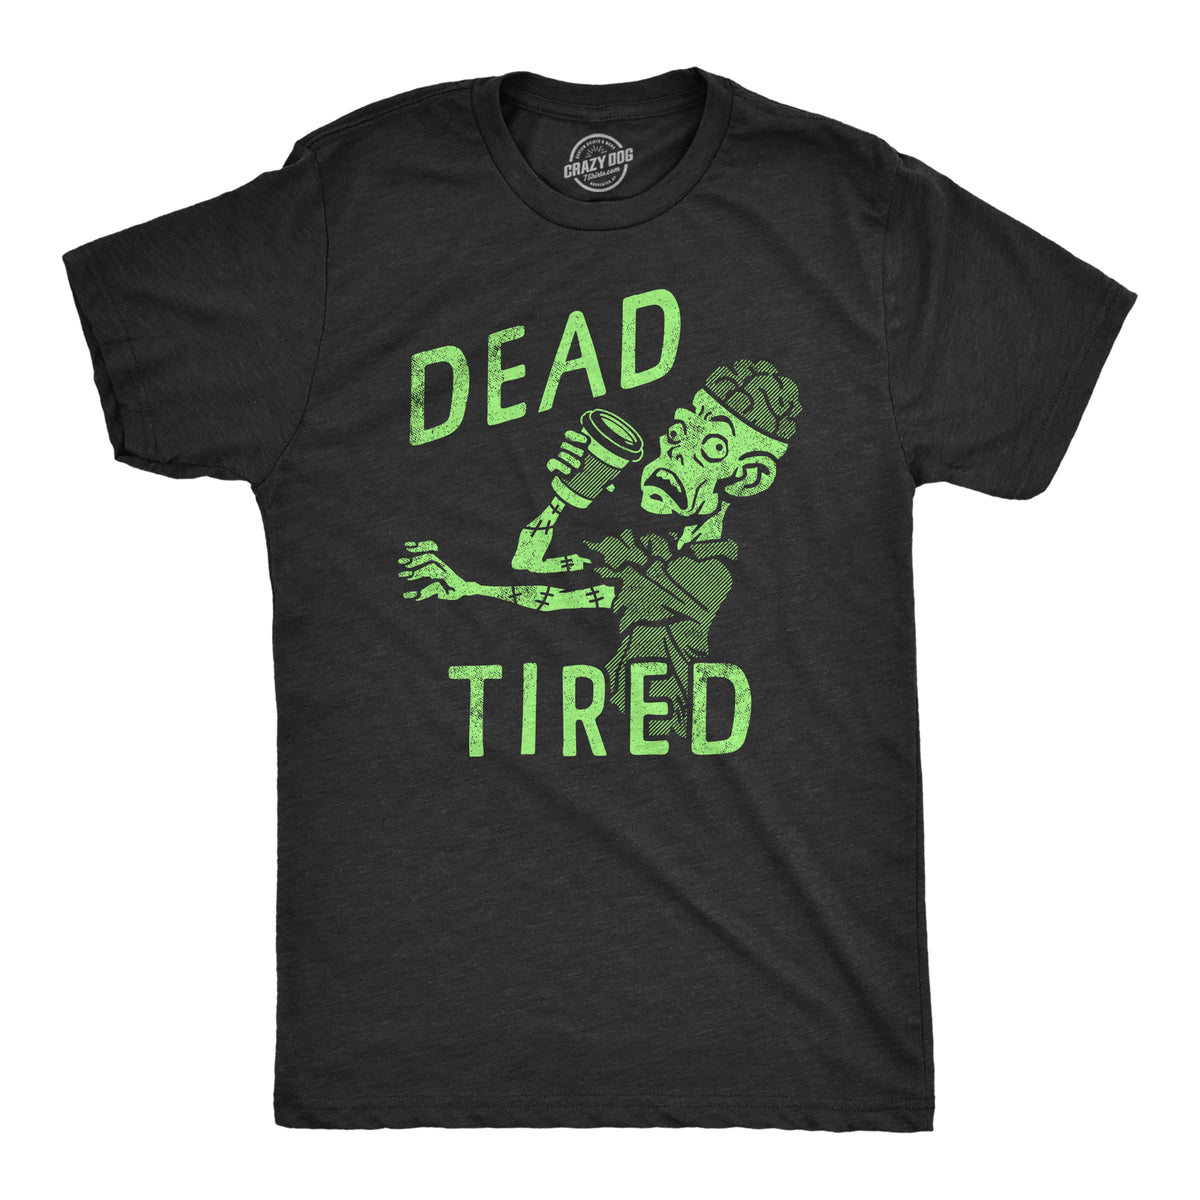 Funny Heather Black - TIRED Dead Tired Mens T Shirt Nerdy Coffee zombie Tee